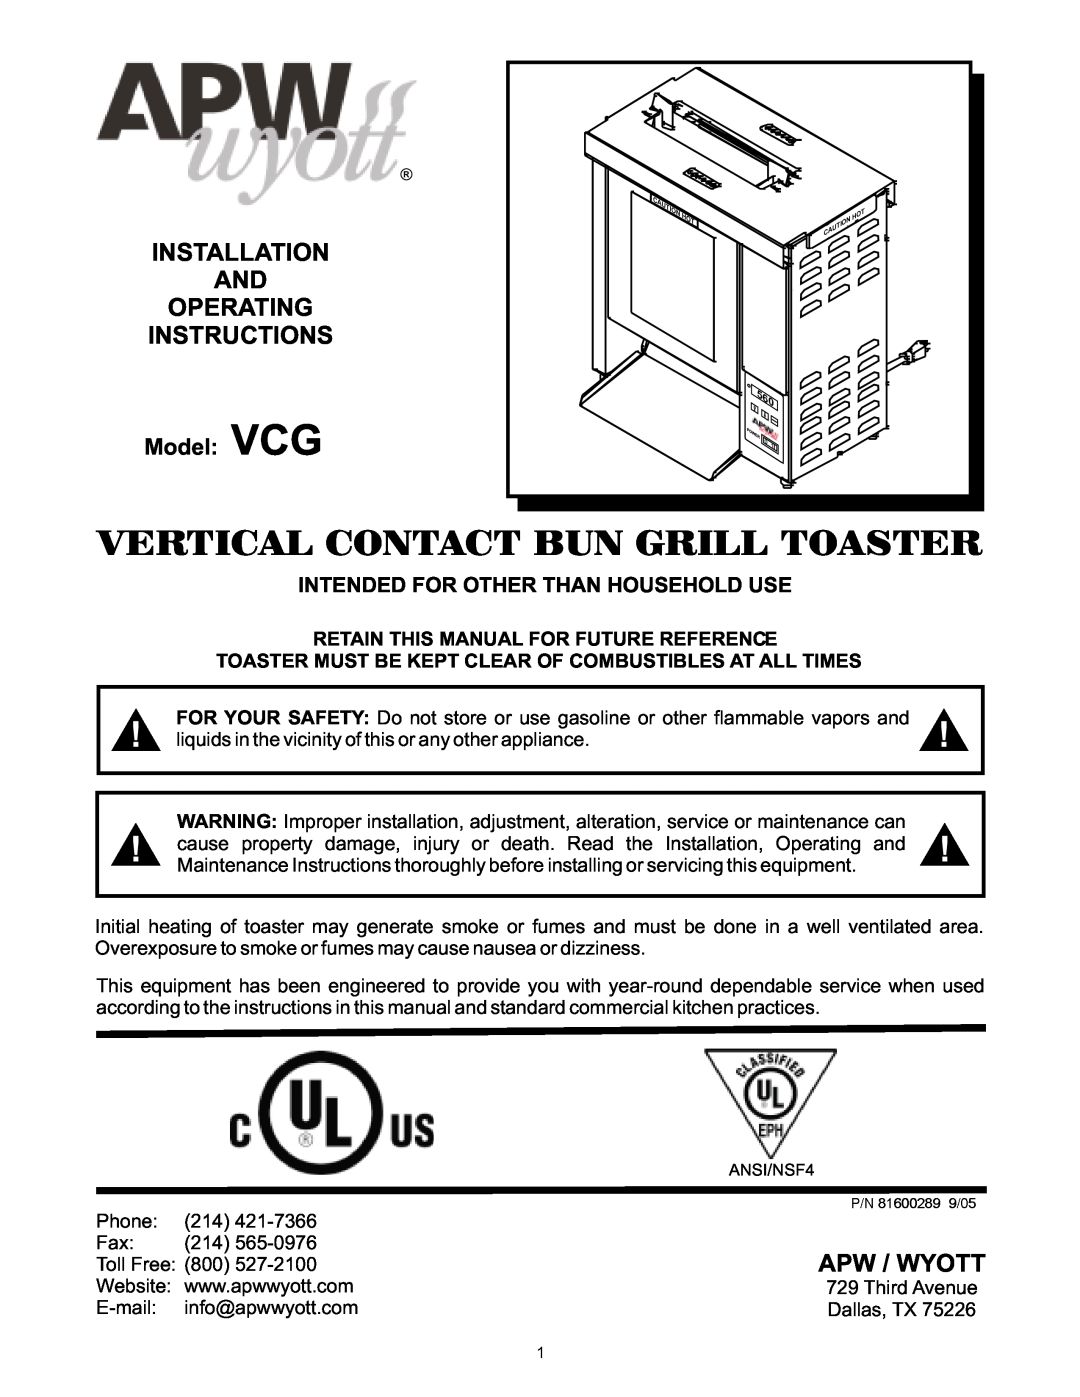 APW Wyott VCG operating instructions Vertical Contact Bun Grill Toaster, Installation And Operating Instructions 